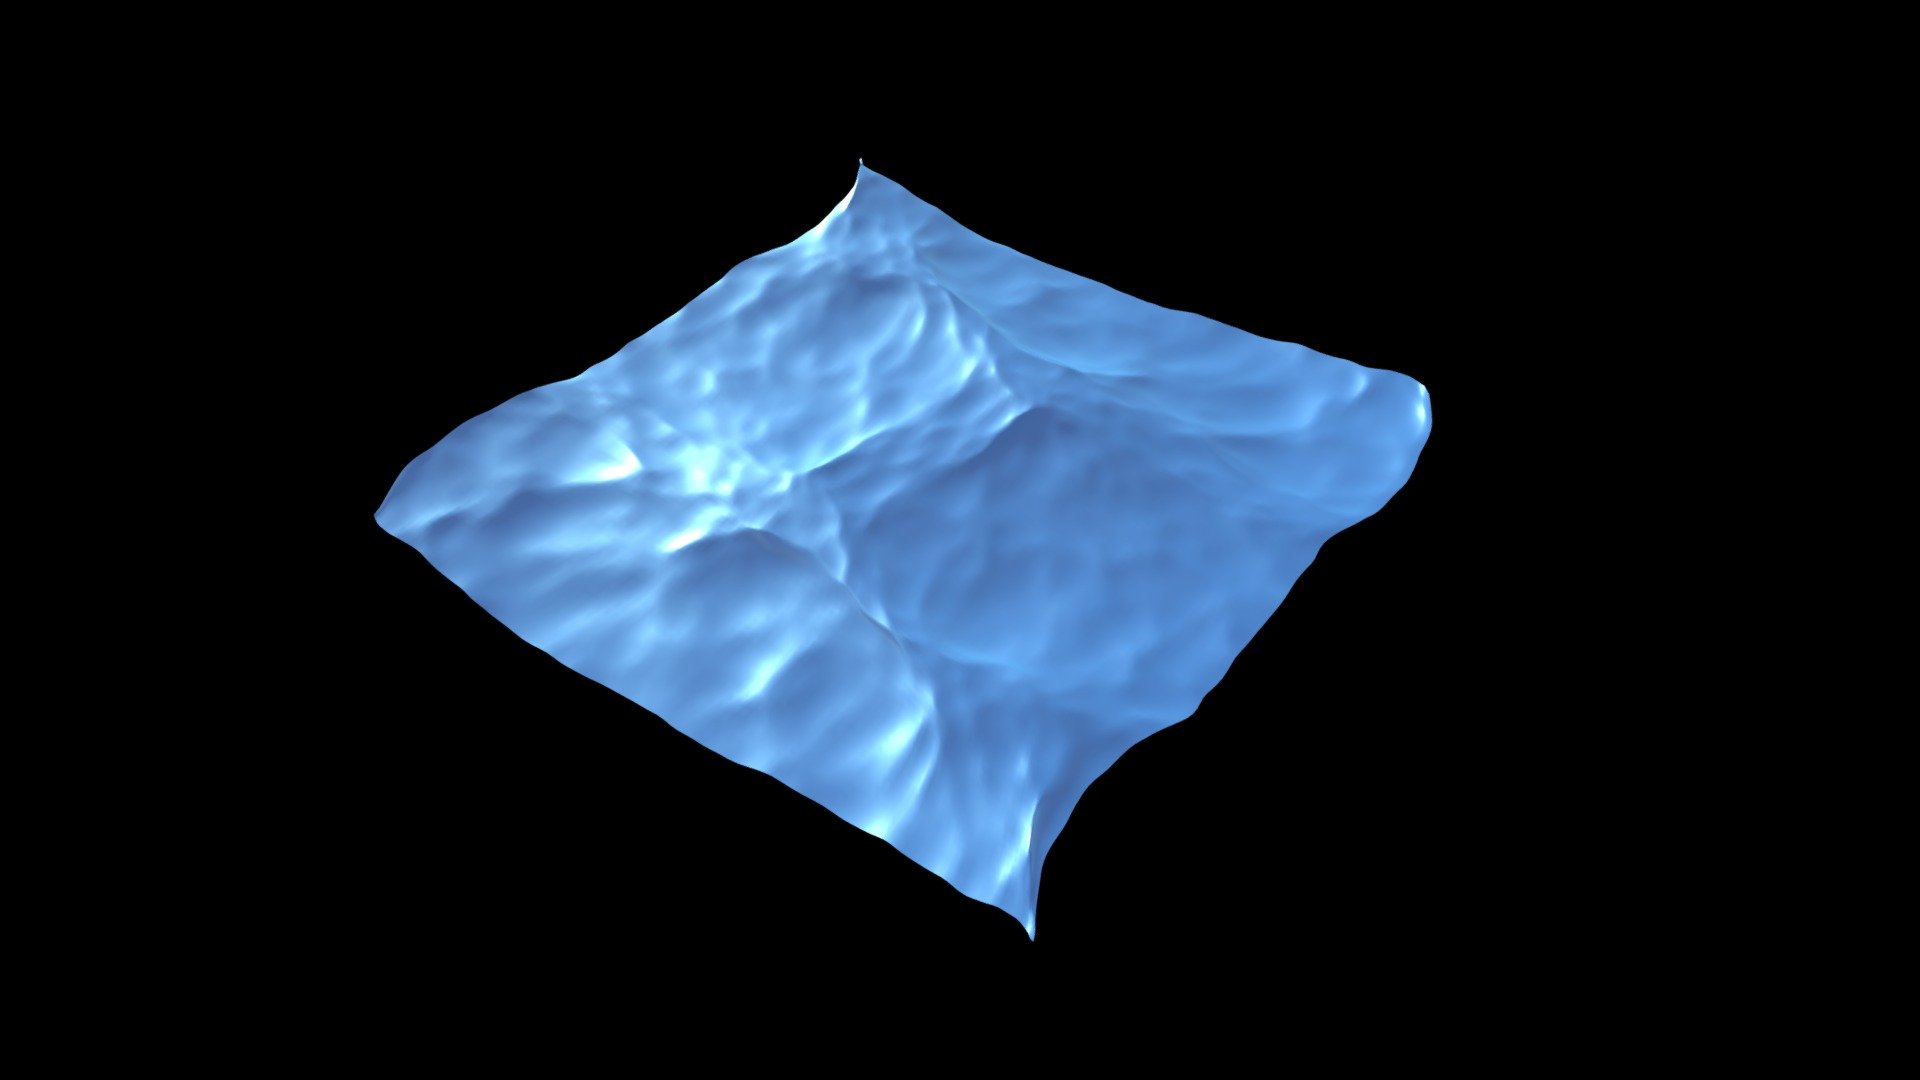 Made in Blender using Ocean Modifier. Exported as OBJ sequence - Ocean Wave Sim - Download Free 3D model by CHEI - UC San Diego (@chei_ucsd) 3d model